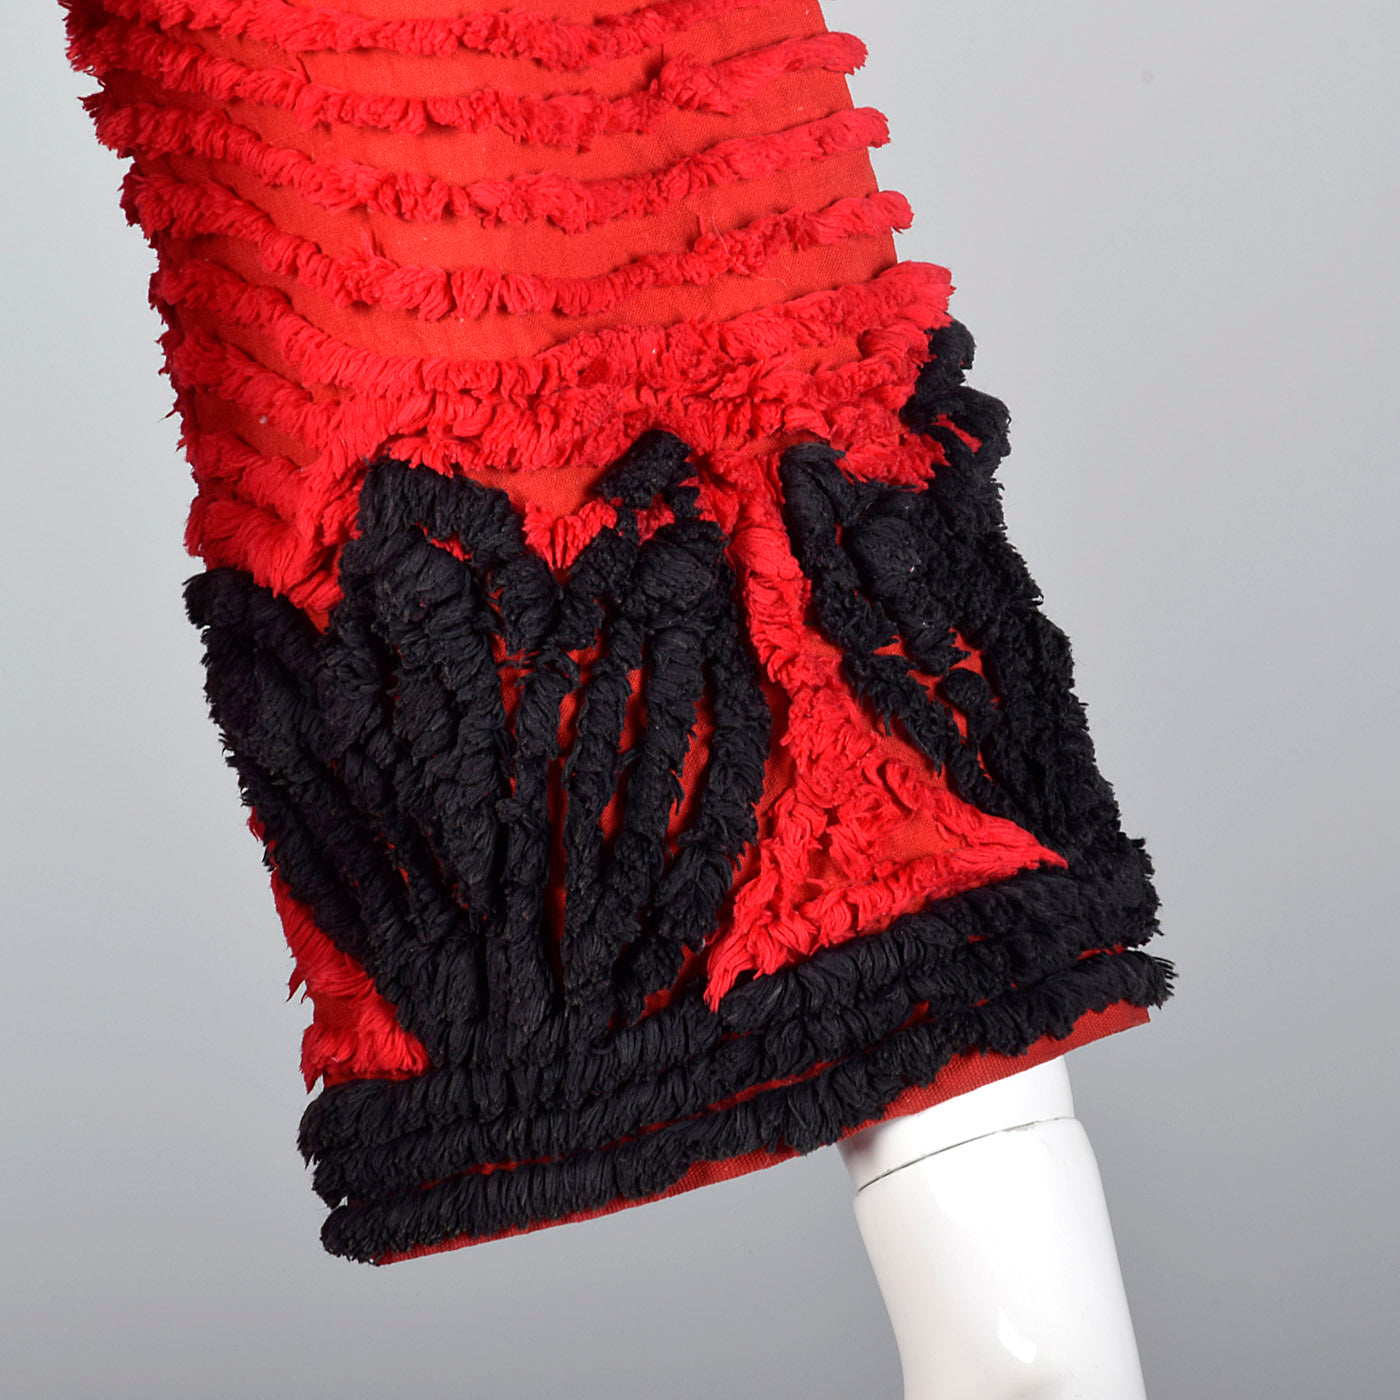 1930s Red and Black Chenille Robe